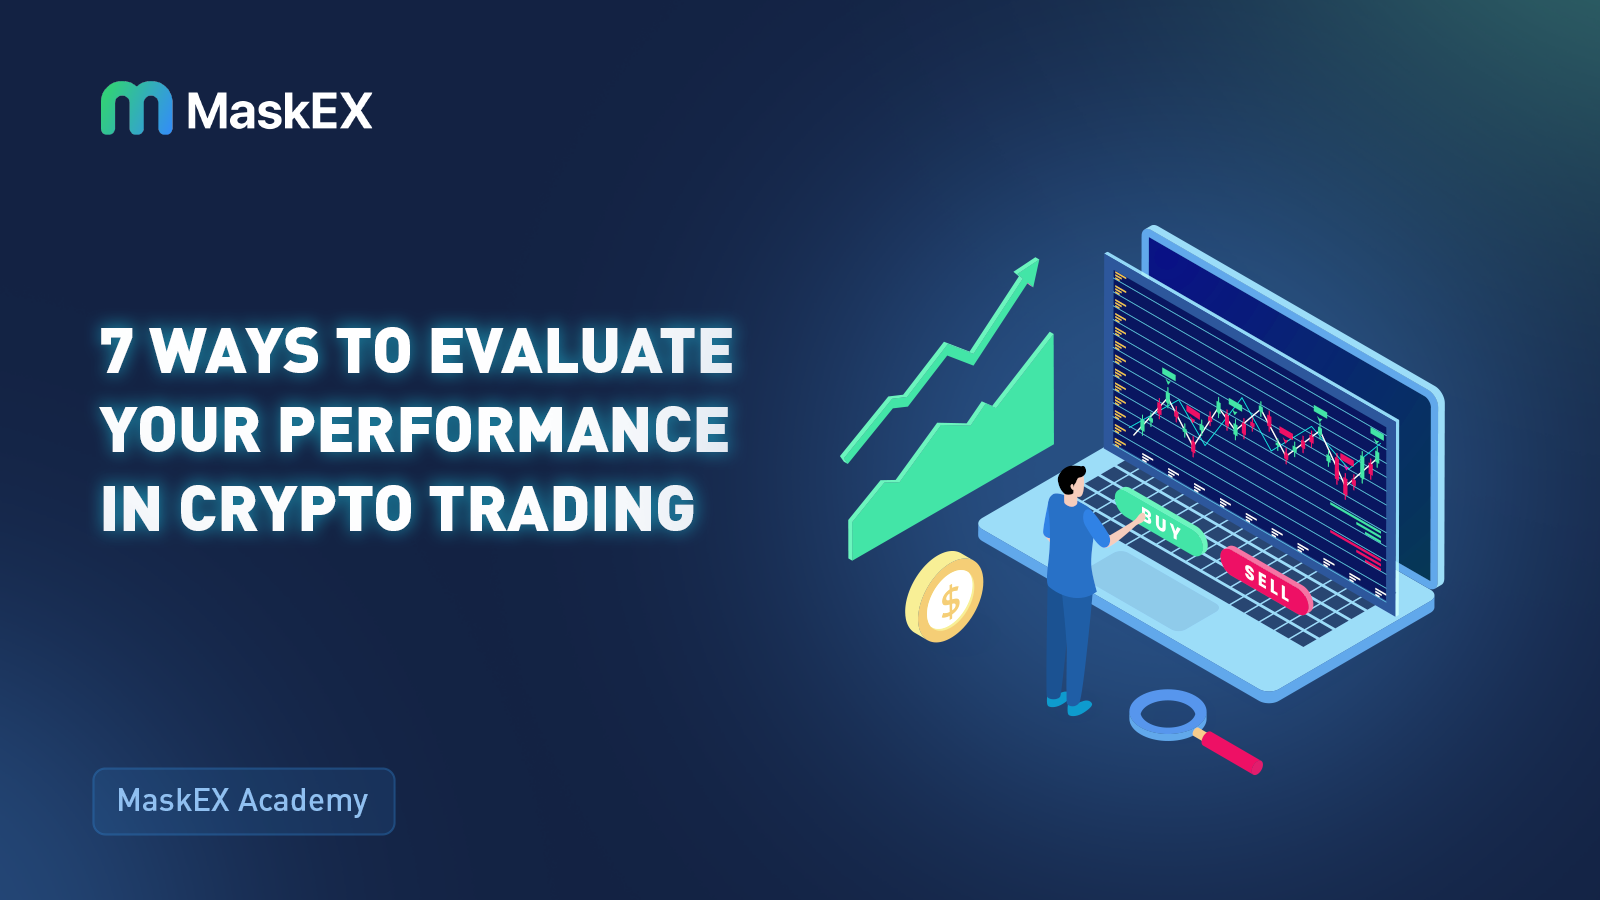 7 Ways to Evaluate Your Performance in Crypto Trading